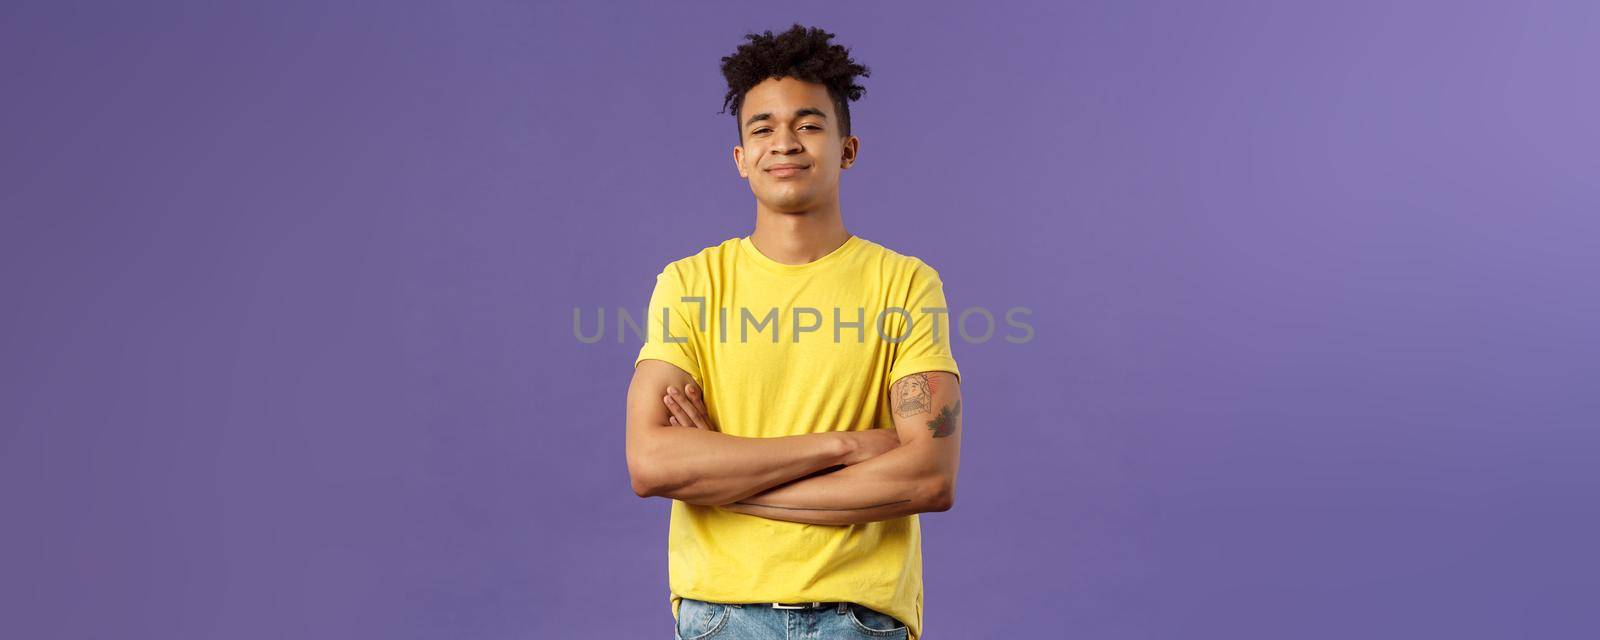 Close-up portrait of arrogant, proud and boastful young smart guy cross hands over chest in confident, self-assured pose, smirk and look mighty, feel like he knows everything, purple background.